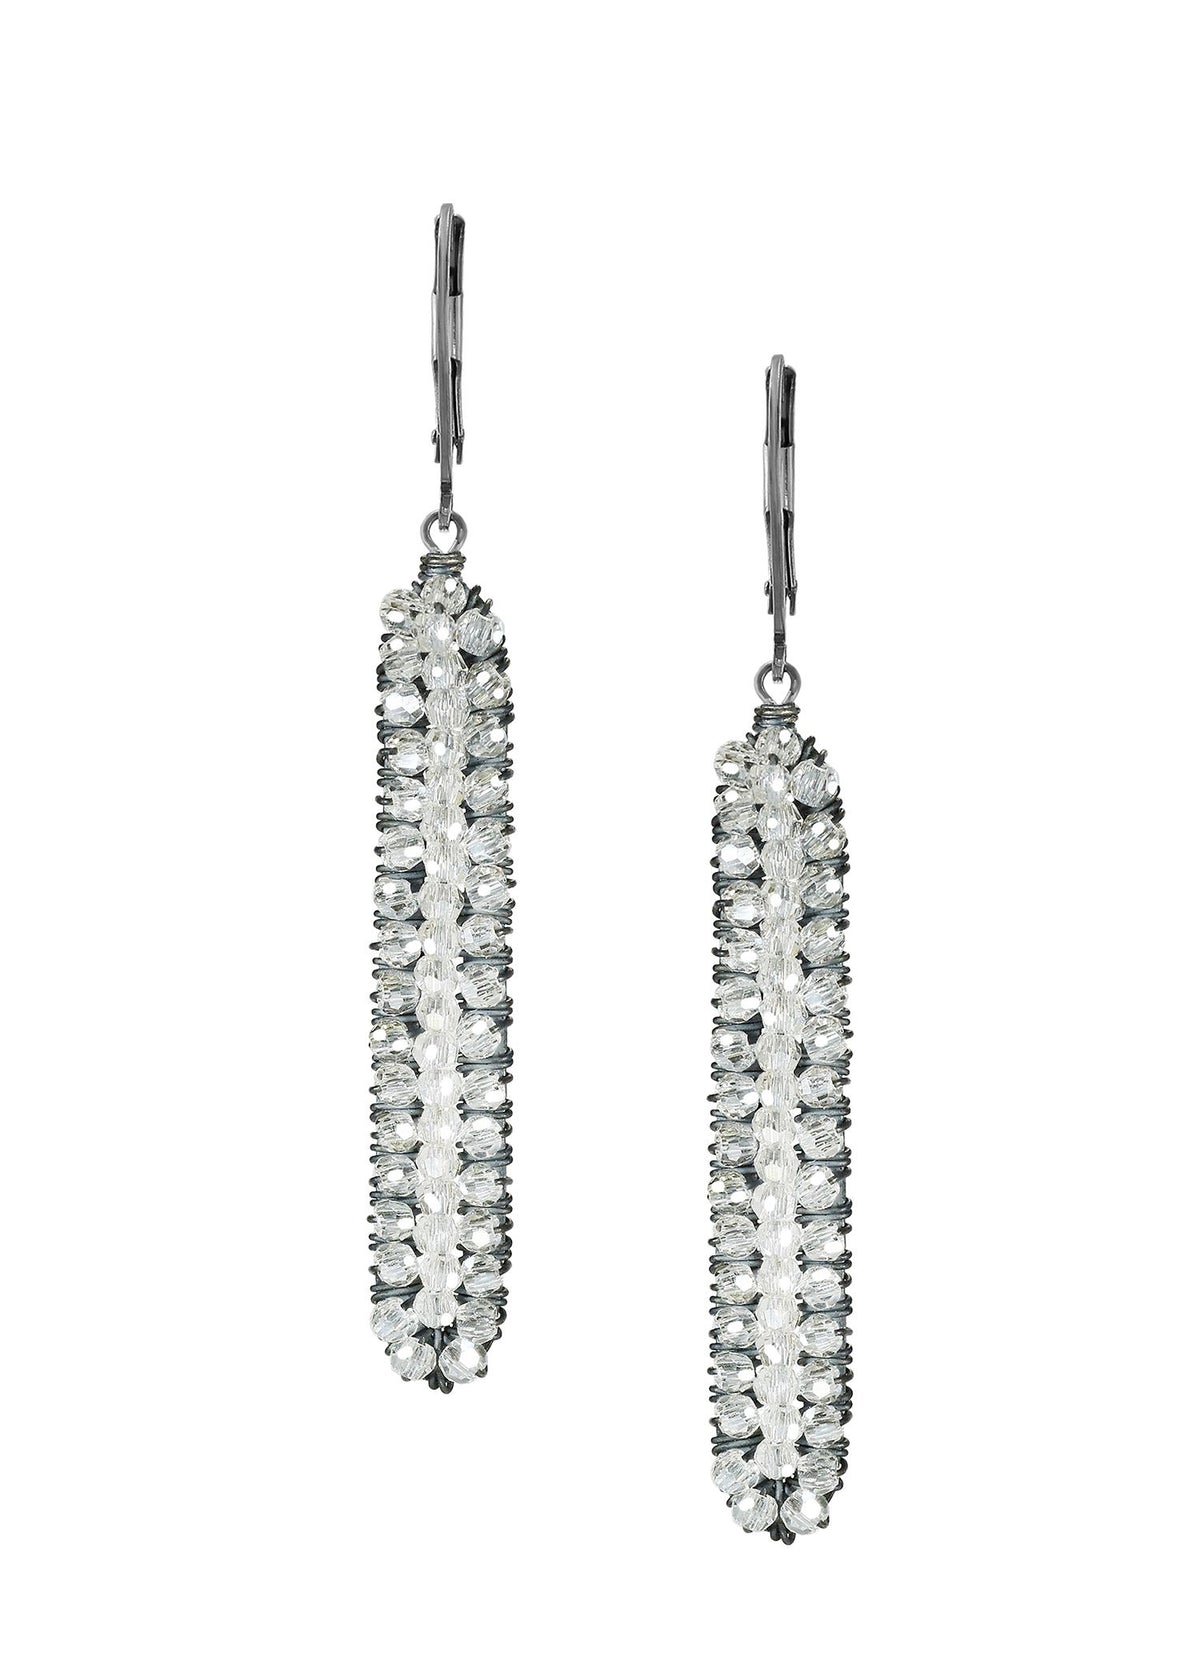 Crystal Sterling silver Earrings measure 2&quot; in length (including the levers) and 1/4&quot; in width Handmade in our Los Angeles studio